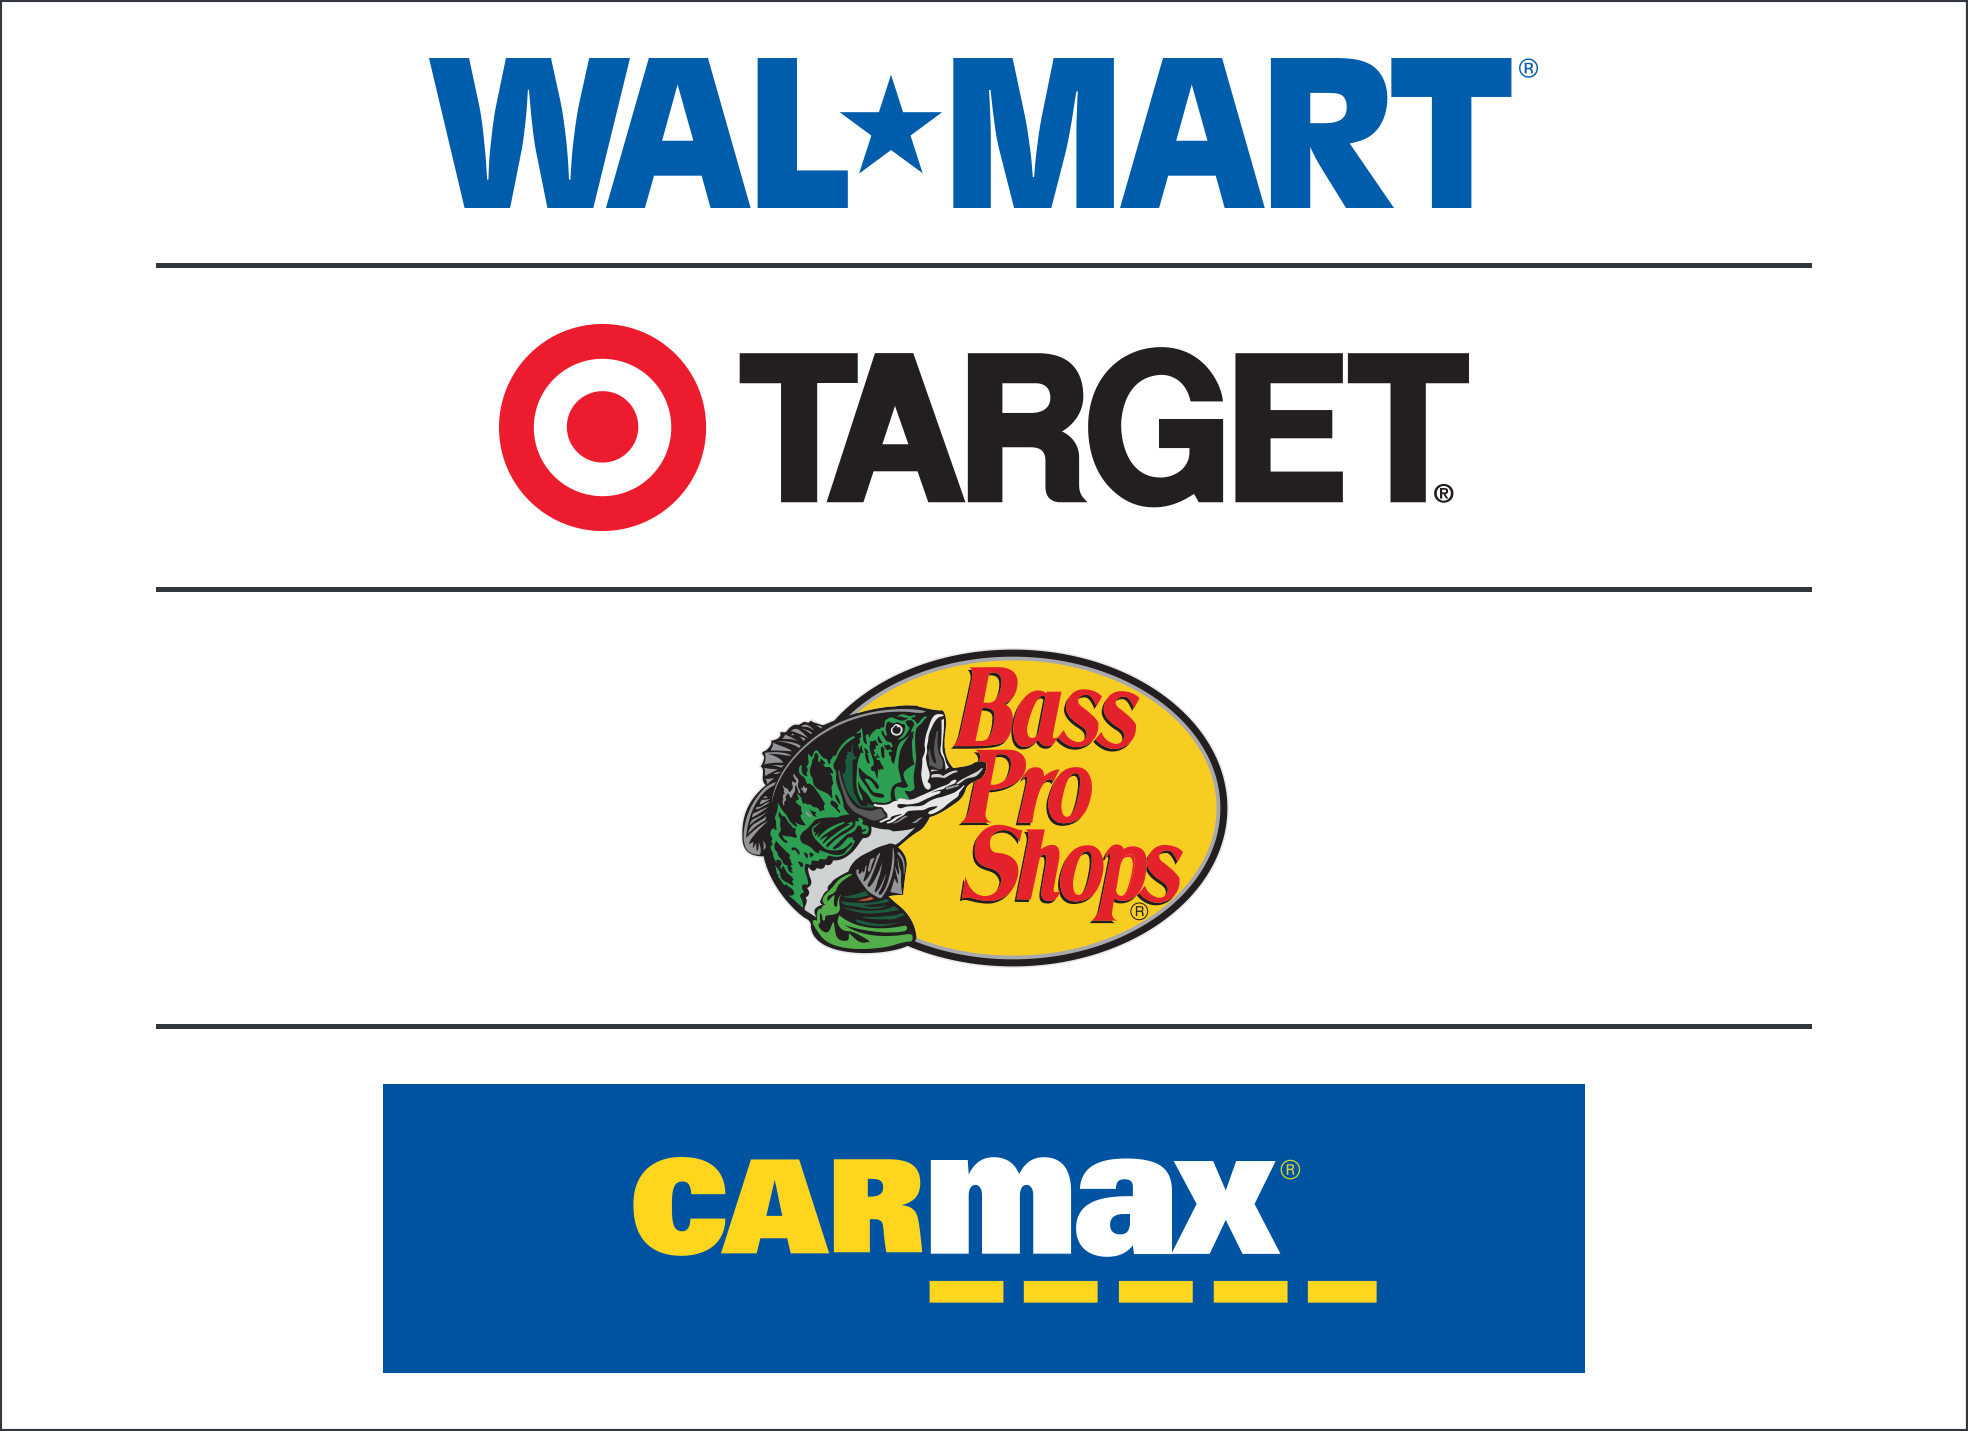 WestLAND's Group Commercial Retail Image - Shows WalMart, Target, Bass Pro Shop and Carmax logos stacked.